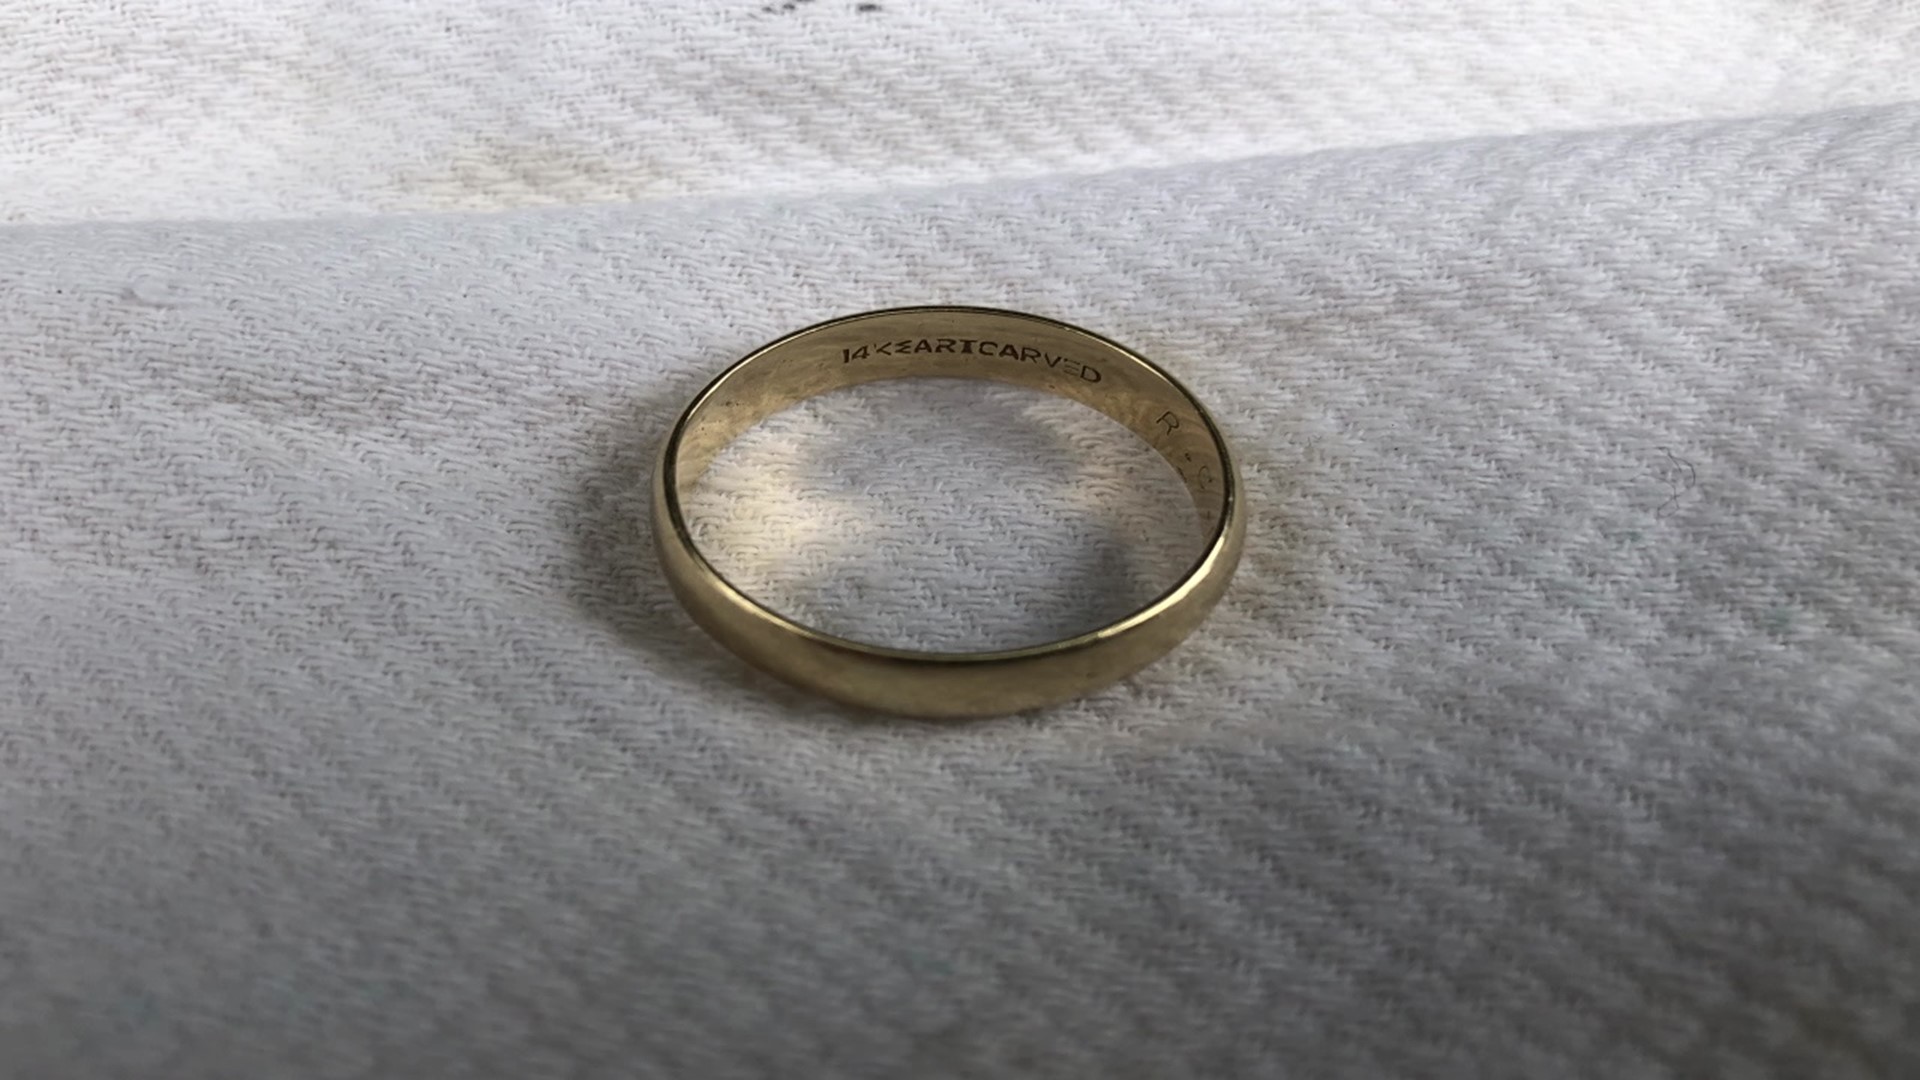 The ring is gold with an engraving on it, and it's believed to be a men's wedding band.